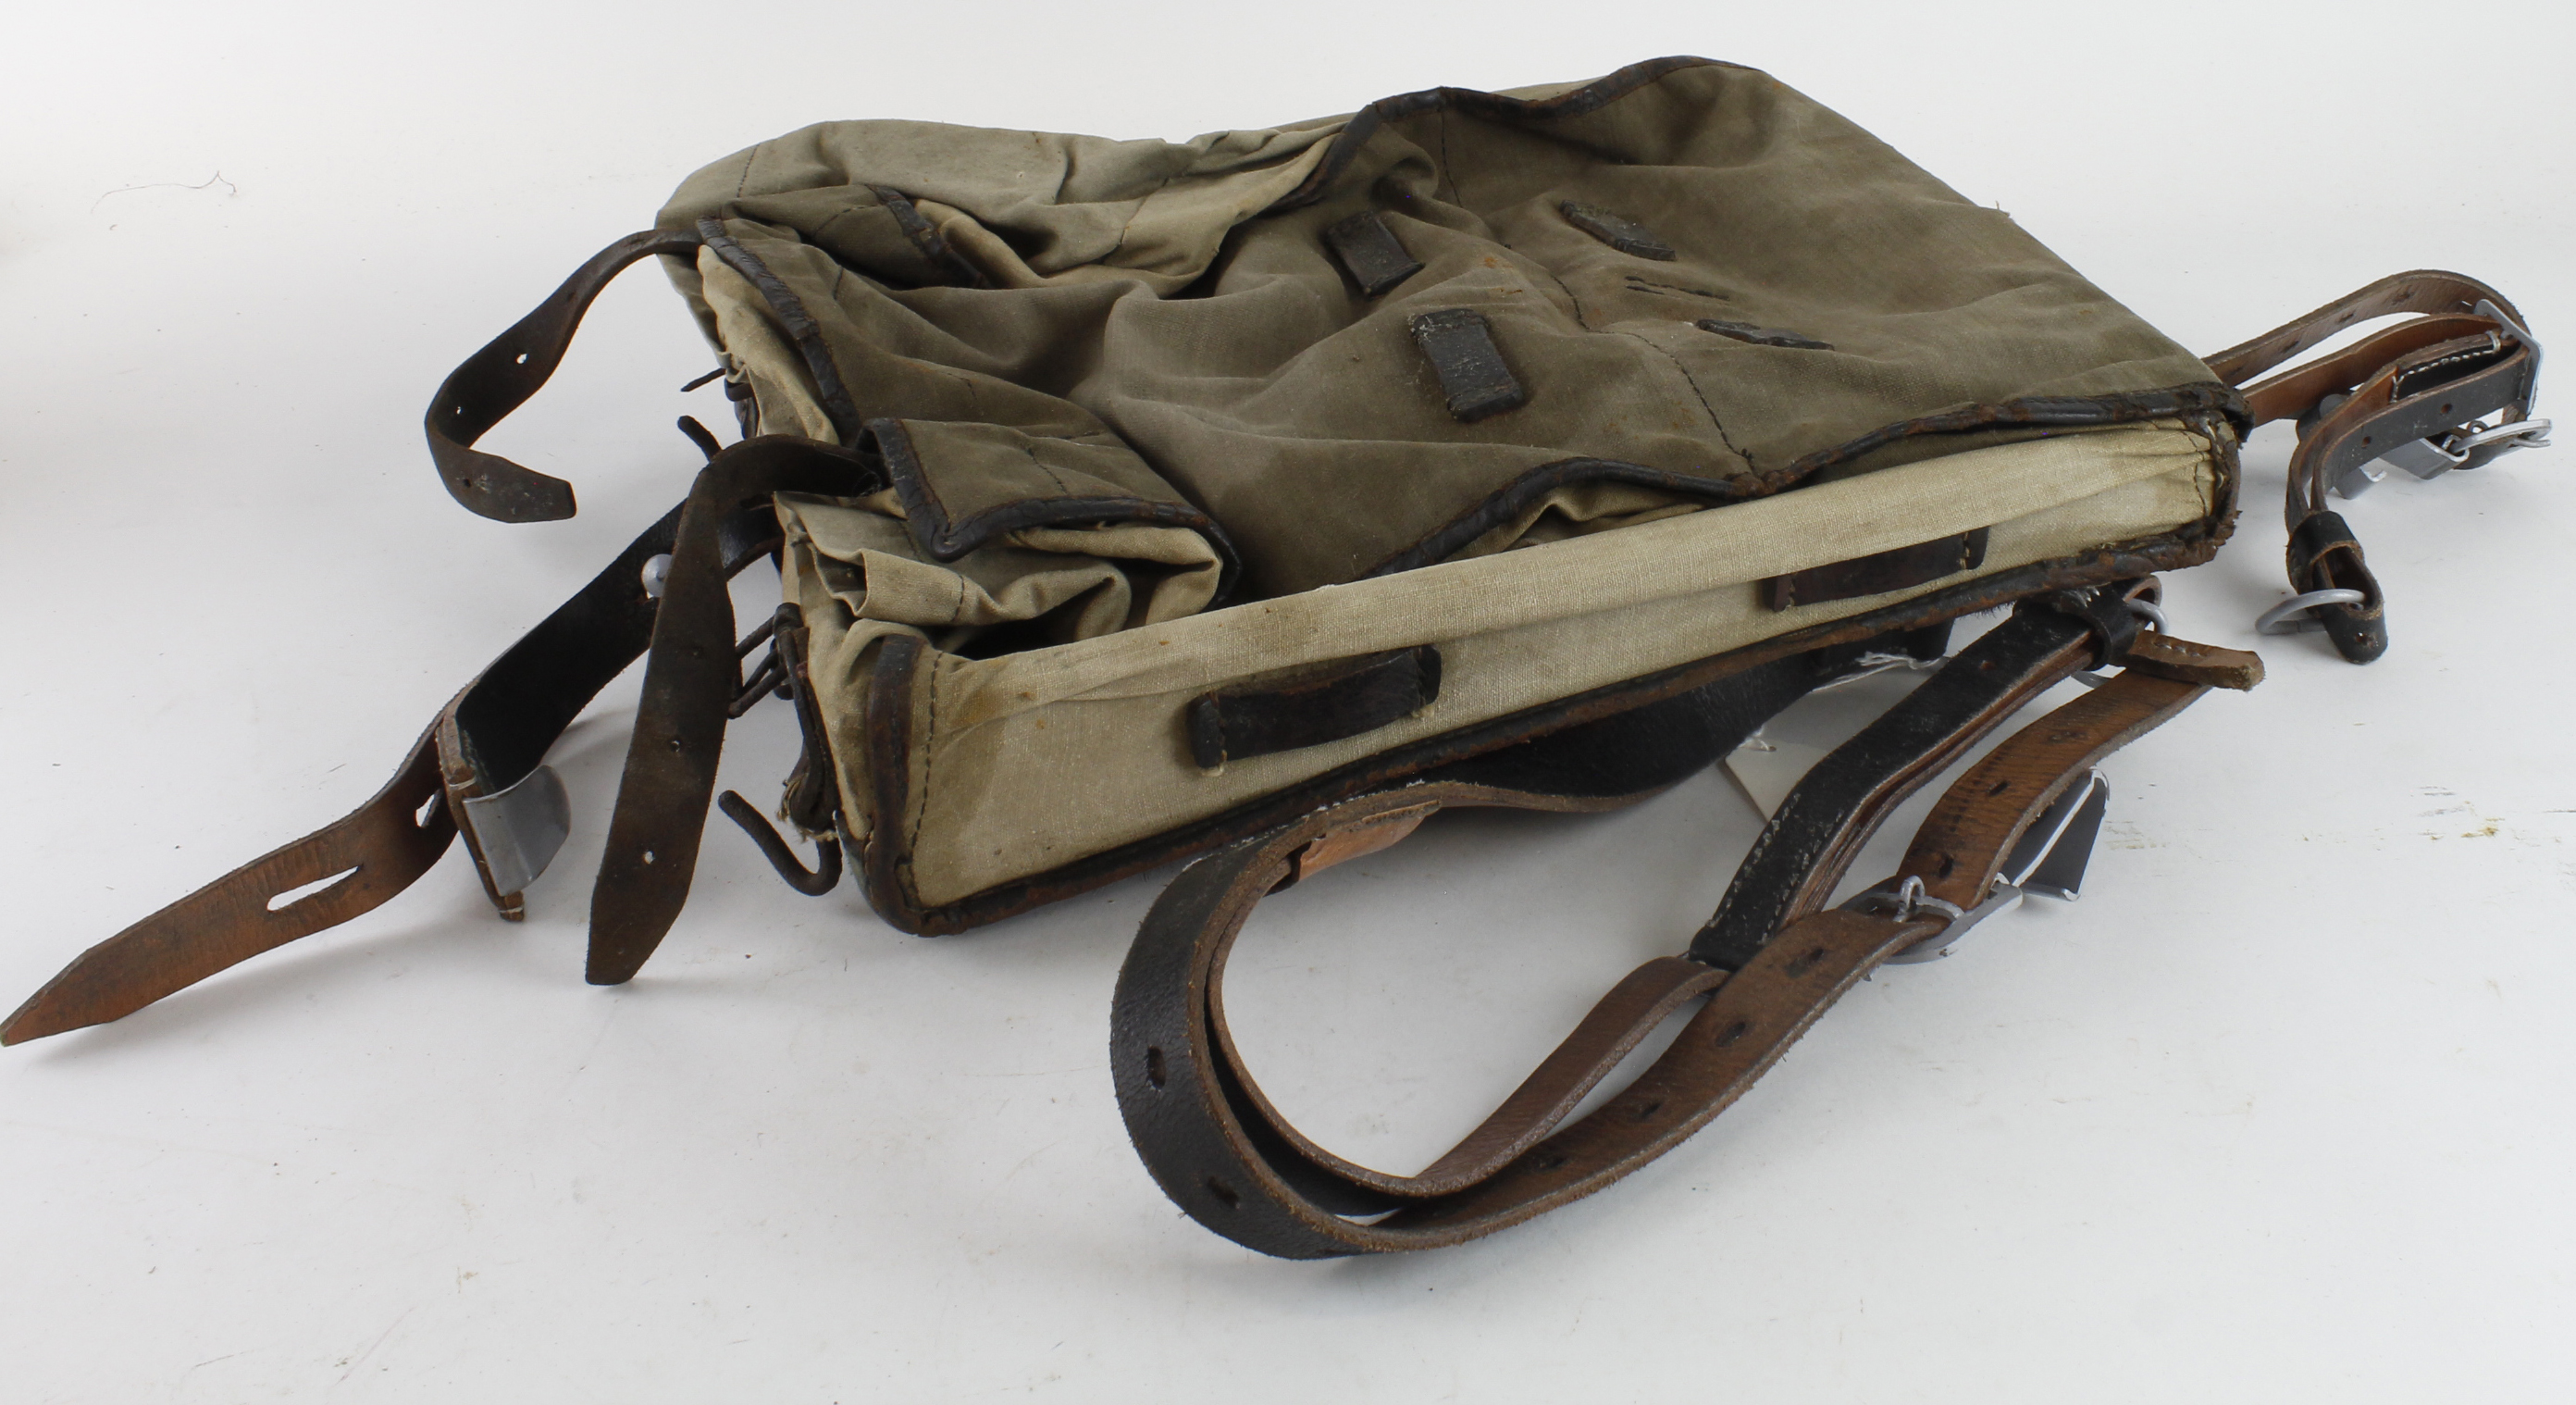 German WW2 back pack complete with leather shoulder straps.